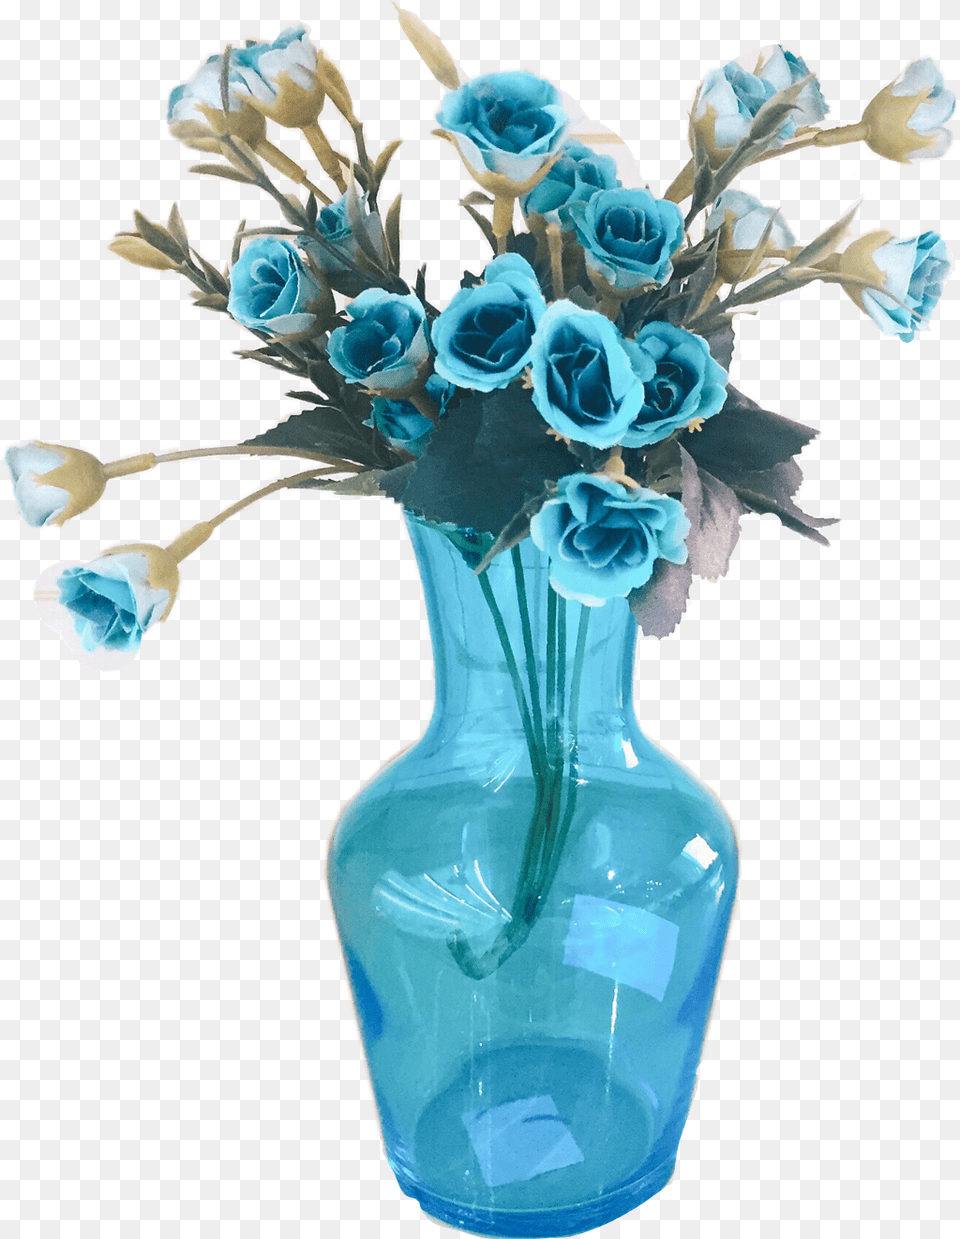 Teal Turquoise Glass Vase Flowers Decor Roses Bouquet, Flower, Flower Arrangement, Flower Bouquet, Jar Free Png